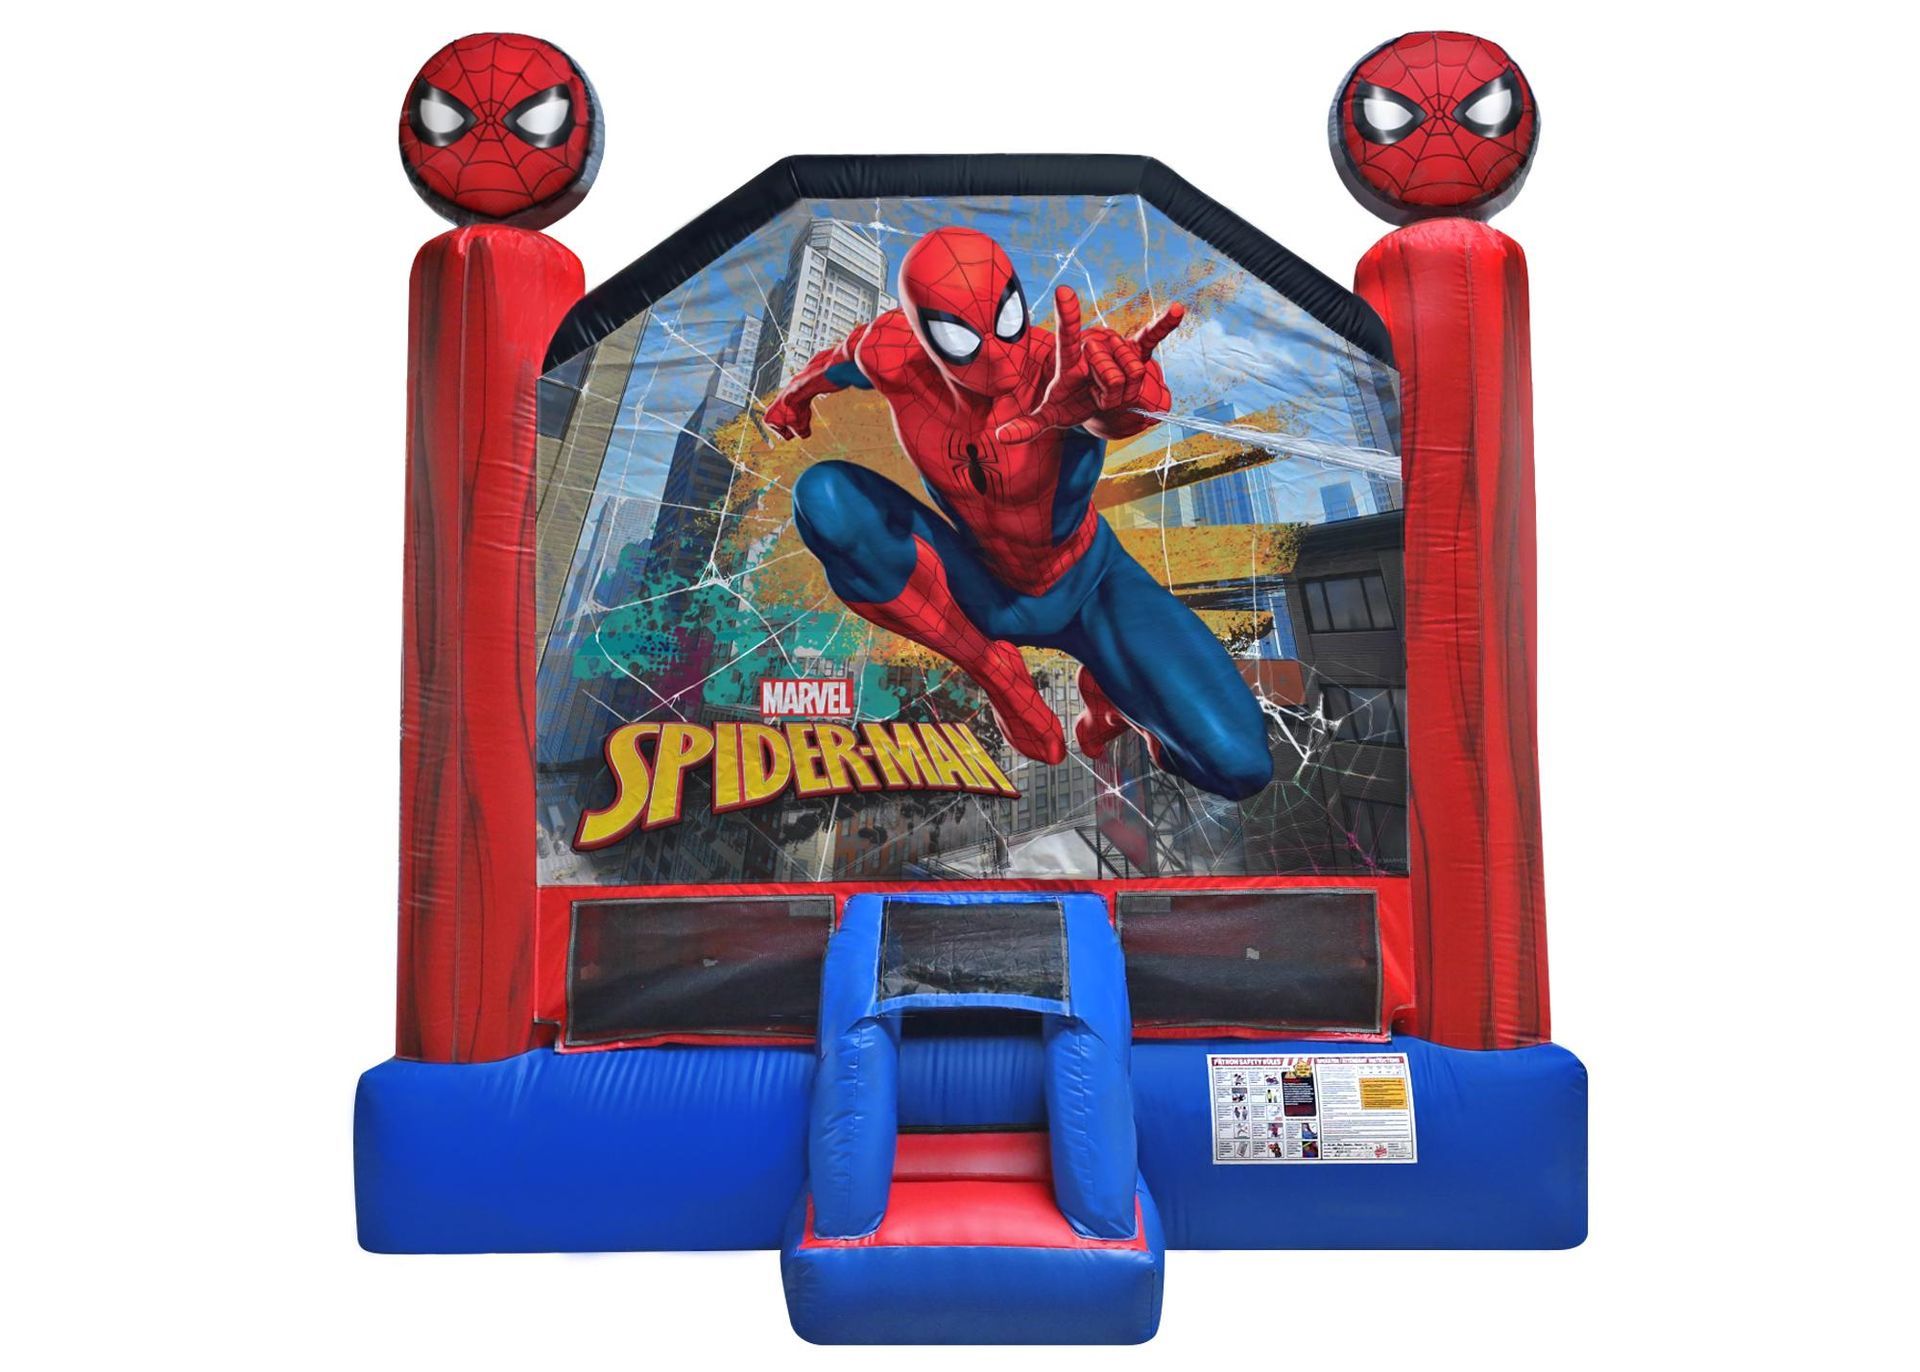 Bouncy House with a Spiderman on it | Rancho Cucamonga, CA | Jam Jam Bounce House and Inflatables